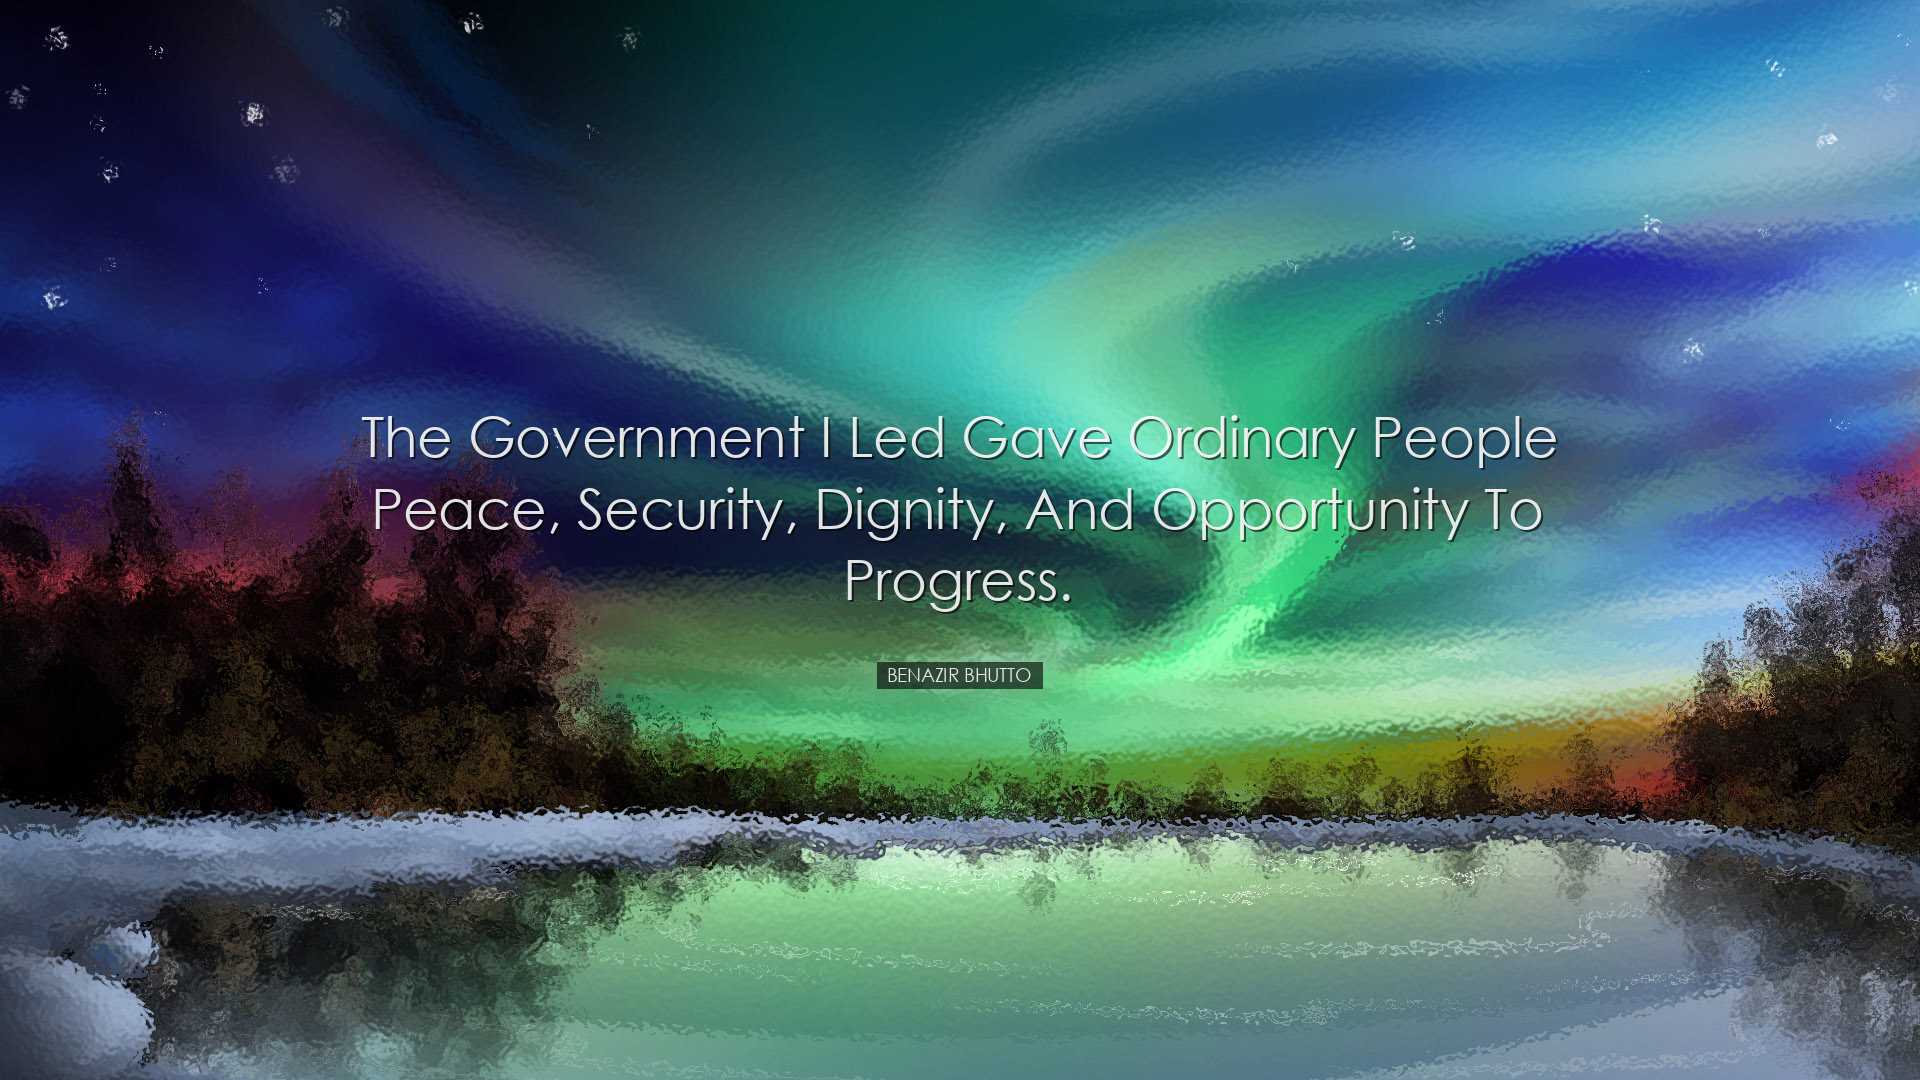 The government I led gave ordinary people peace, security, dignity